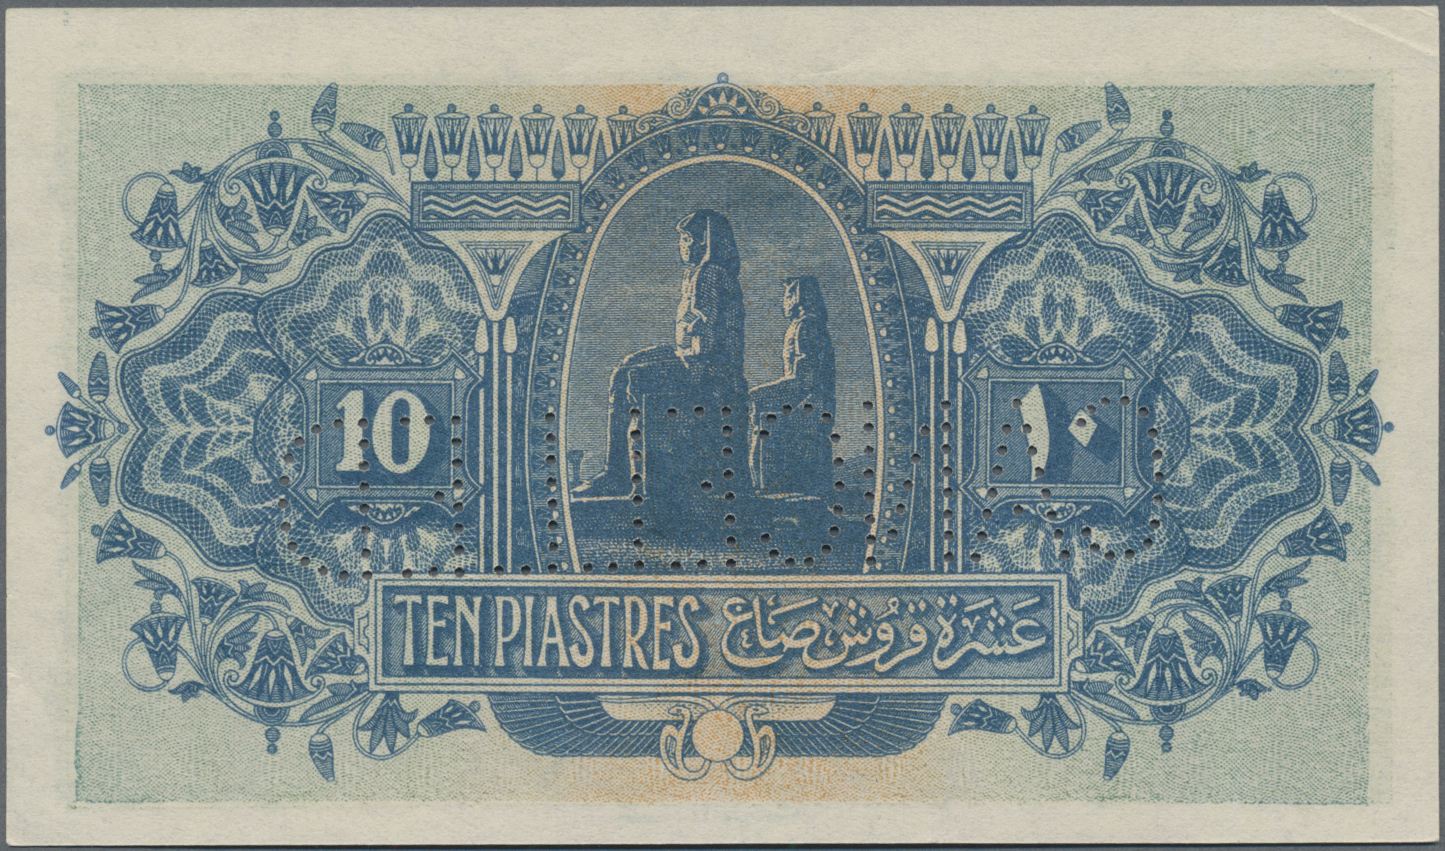 Lot 00101 - Egypt / Ägypten | Banknoten  -  Auktionshaus Christoph Gärtner GmbH & Co. KG 54th AUCTION - Day 1 Coins & Banknotes